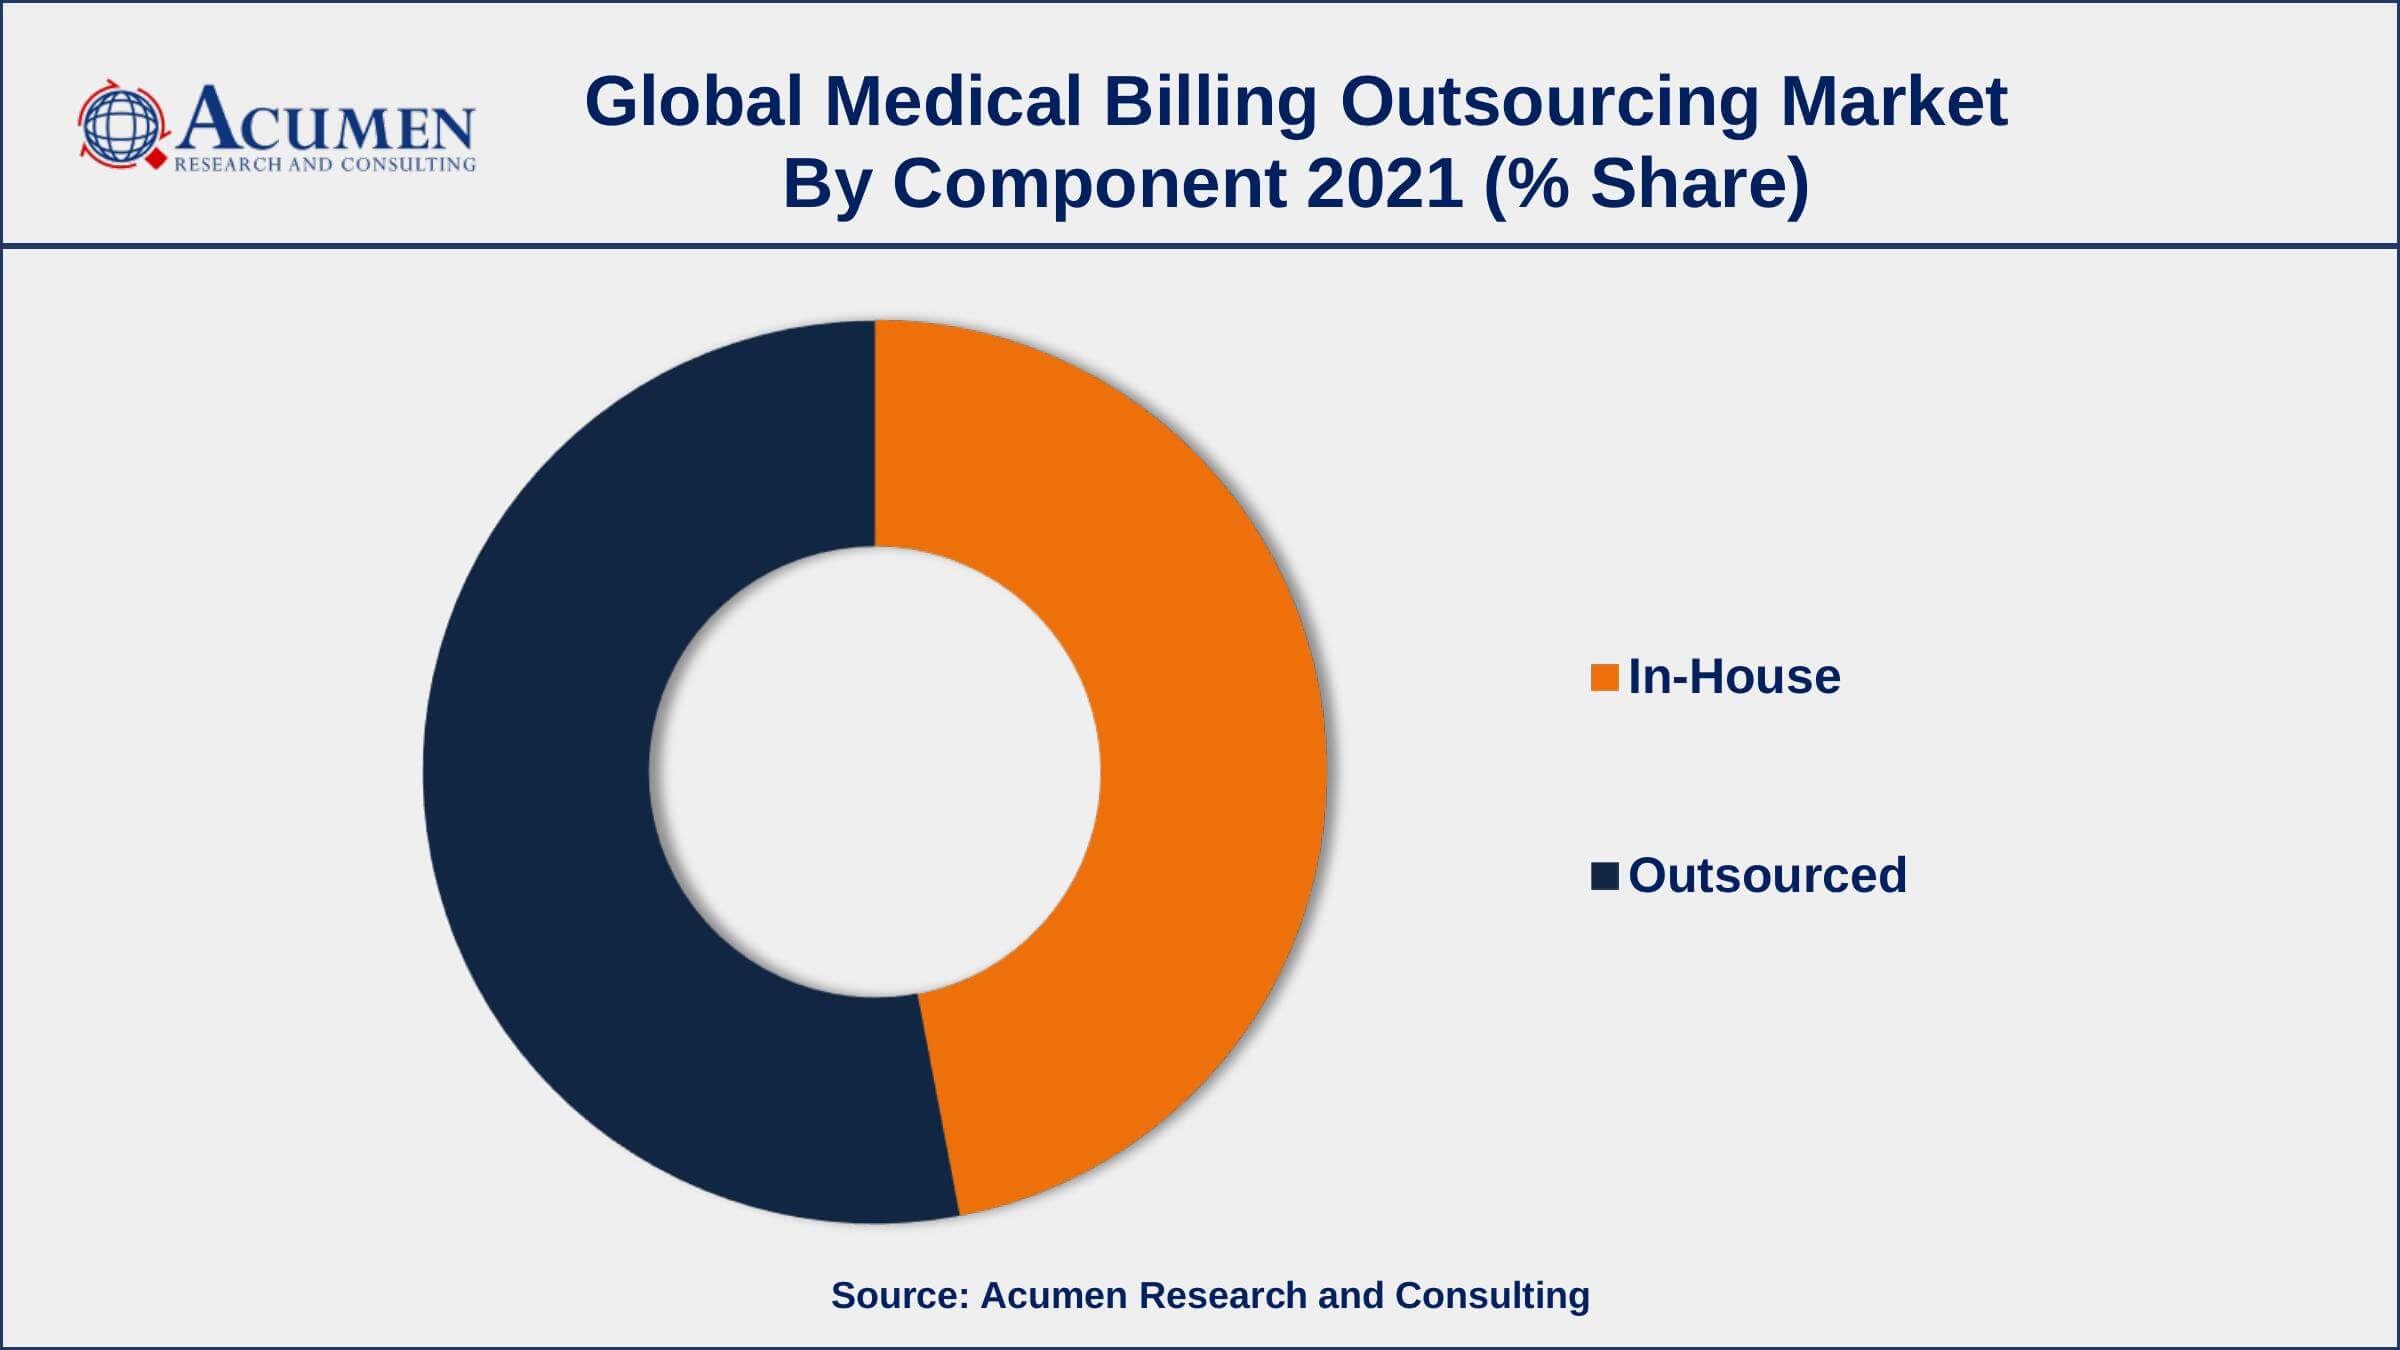 By component, outsourcing segment engaged more than 53% of the total market share in 2021